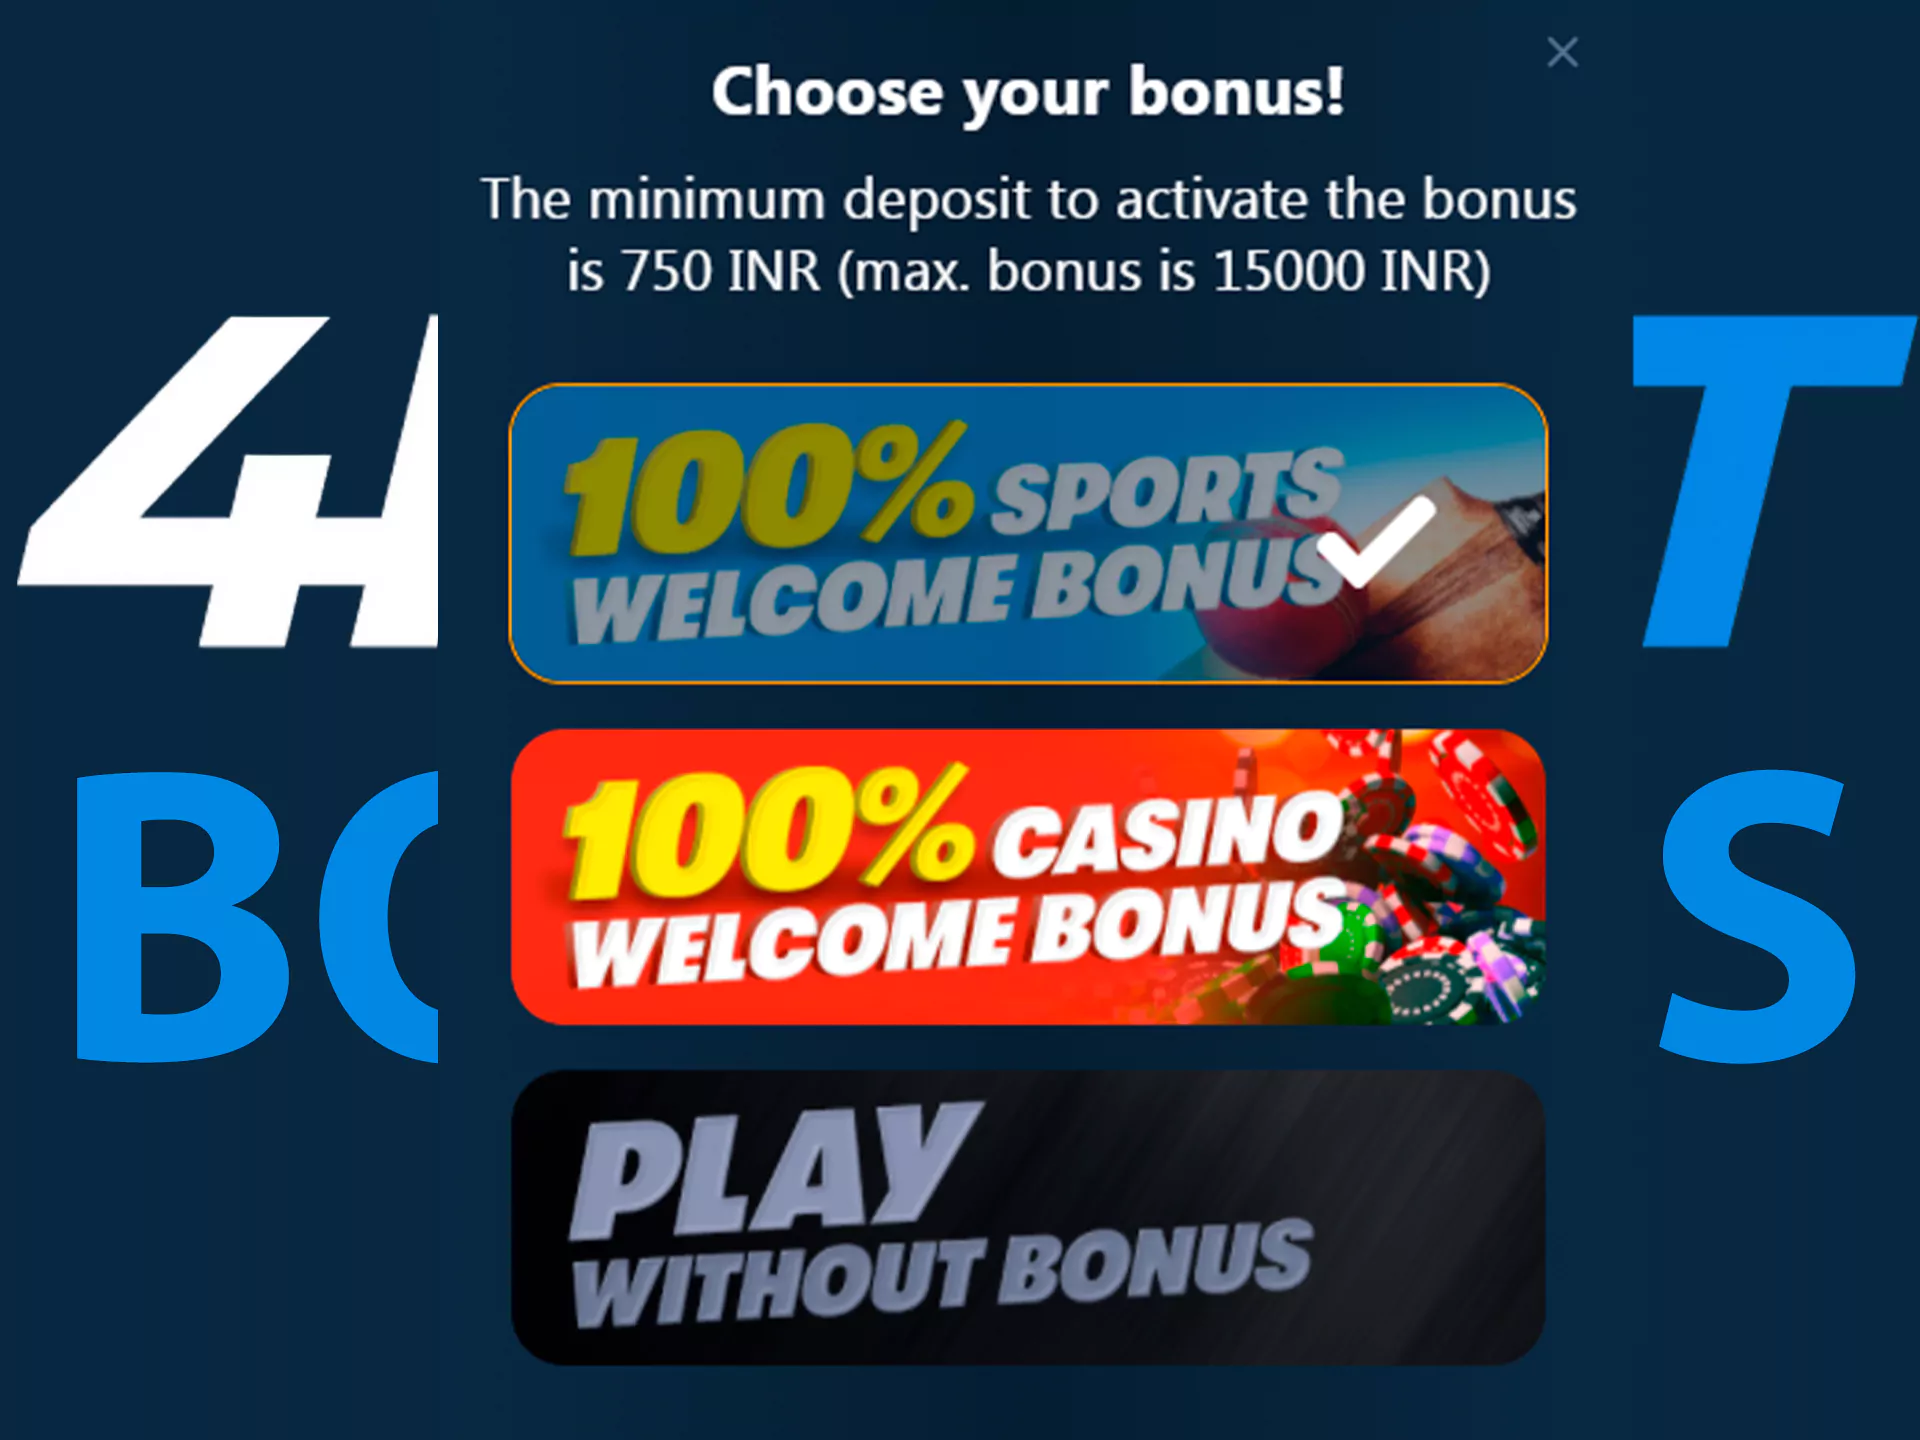 There are a lot of bonuses for both new and regular players in 4rabet.